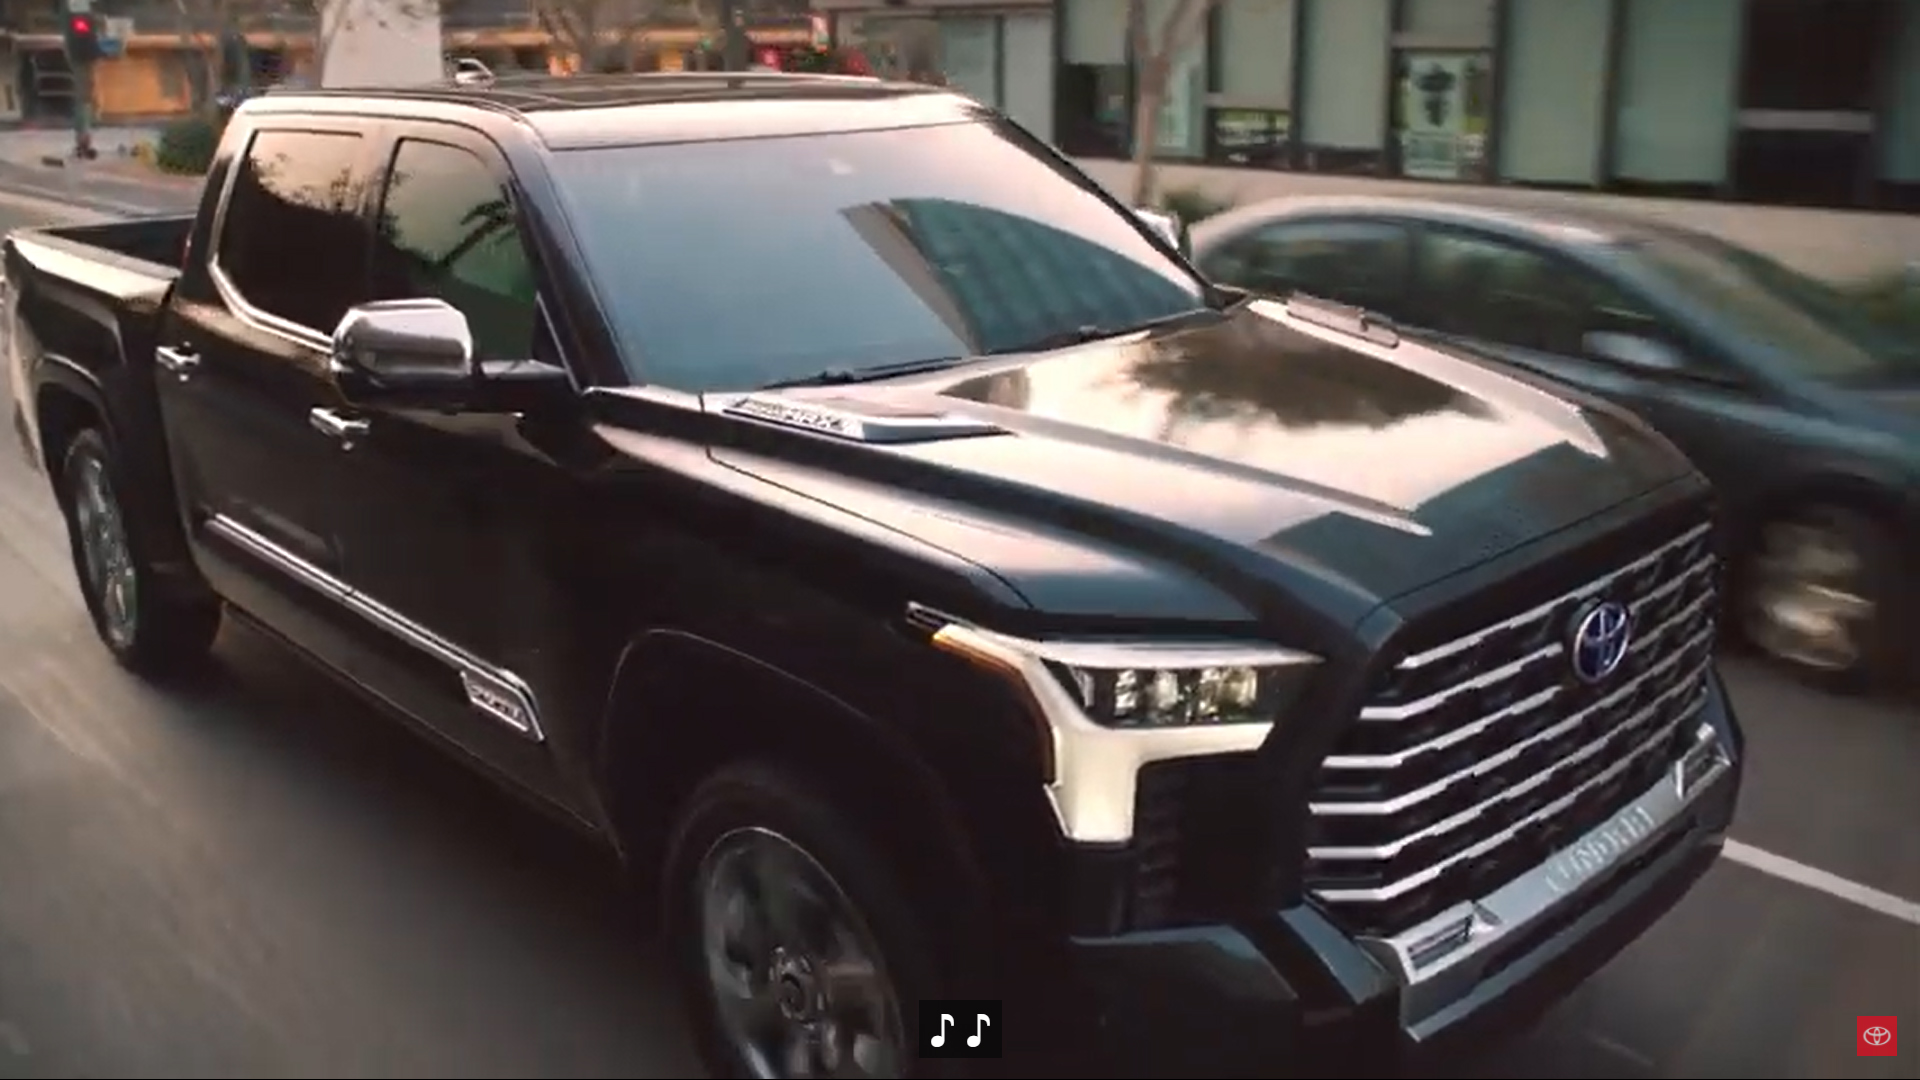 Toyota’s all-new 2022 Tundra Capstone stands out in style in the spot “Cappuccino” by Burrell Communications.